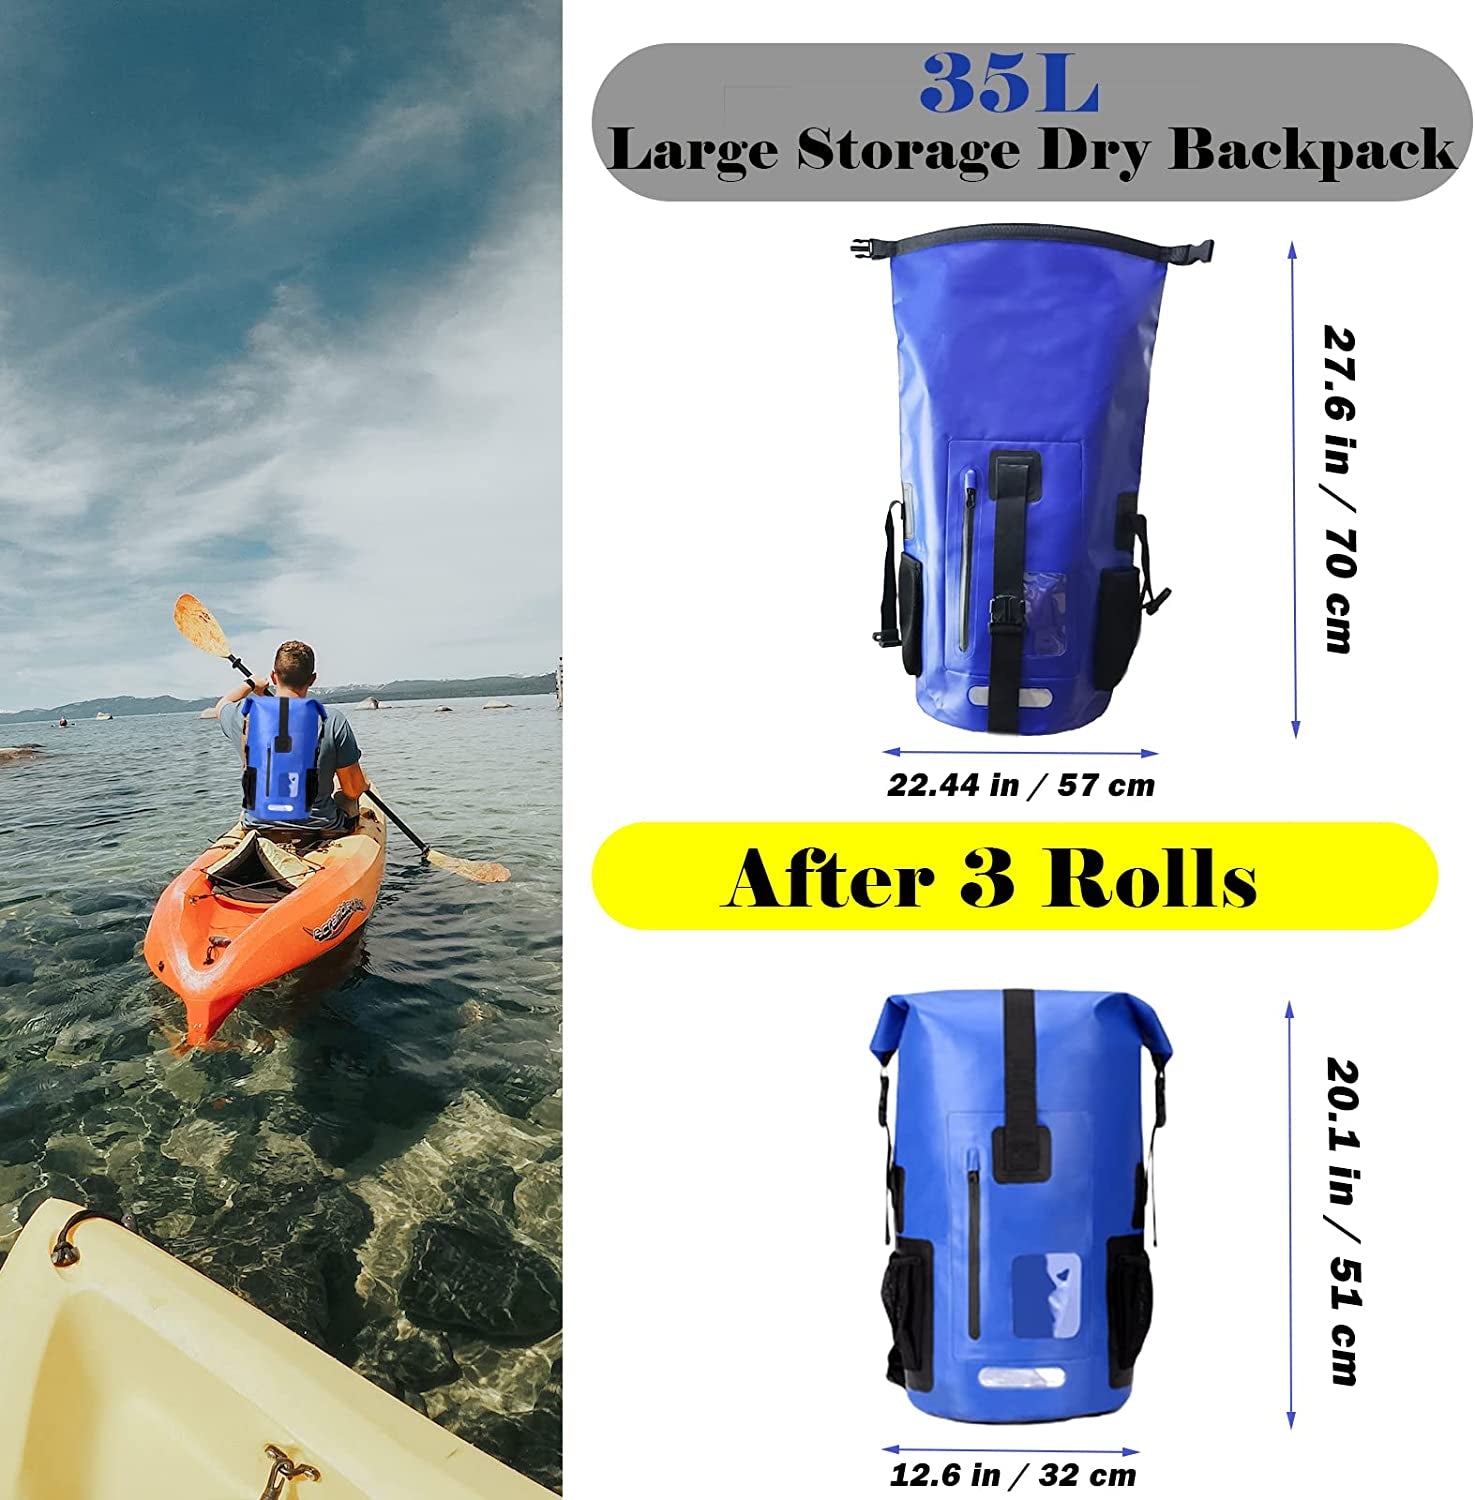 LEWEREST Dry Bag Backpack Waterproof 35L, Heavy Duty Dry Bags for Kayaking Waterproof with Roll-Top Closure, Front & Side Pocket and Soft Padded Backpack Straps, Dry Sack for Boating Sailing Canoeing